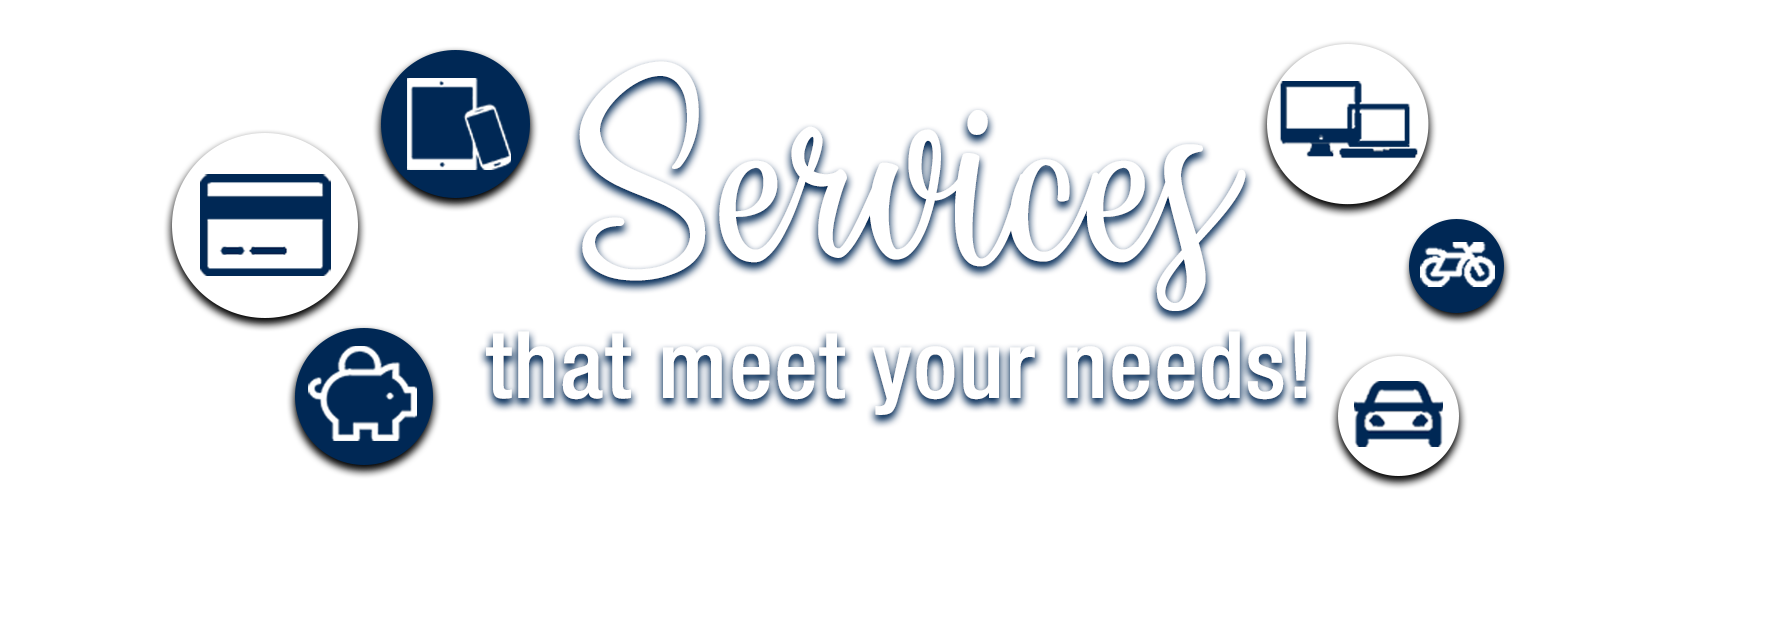 Services that meet your needs